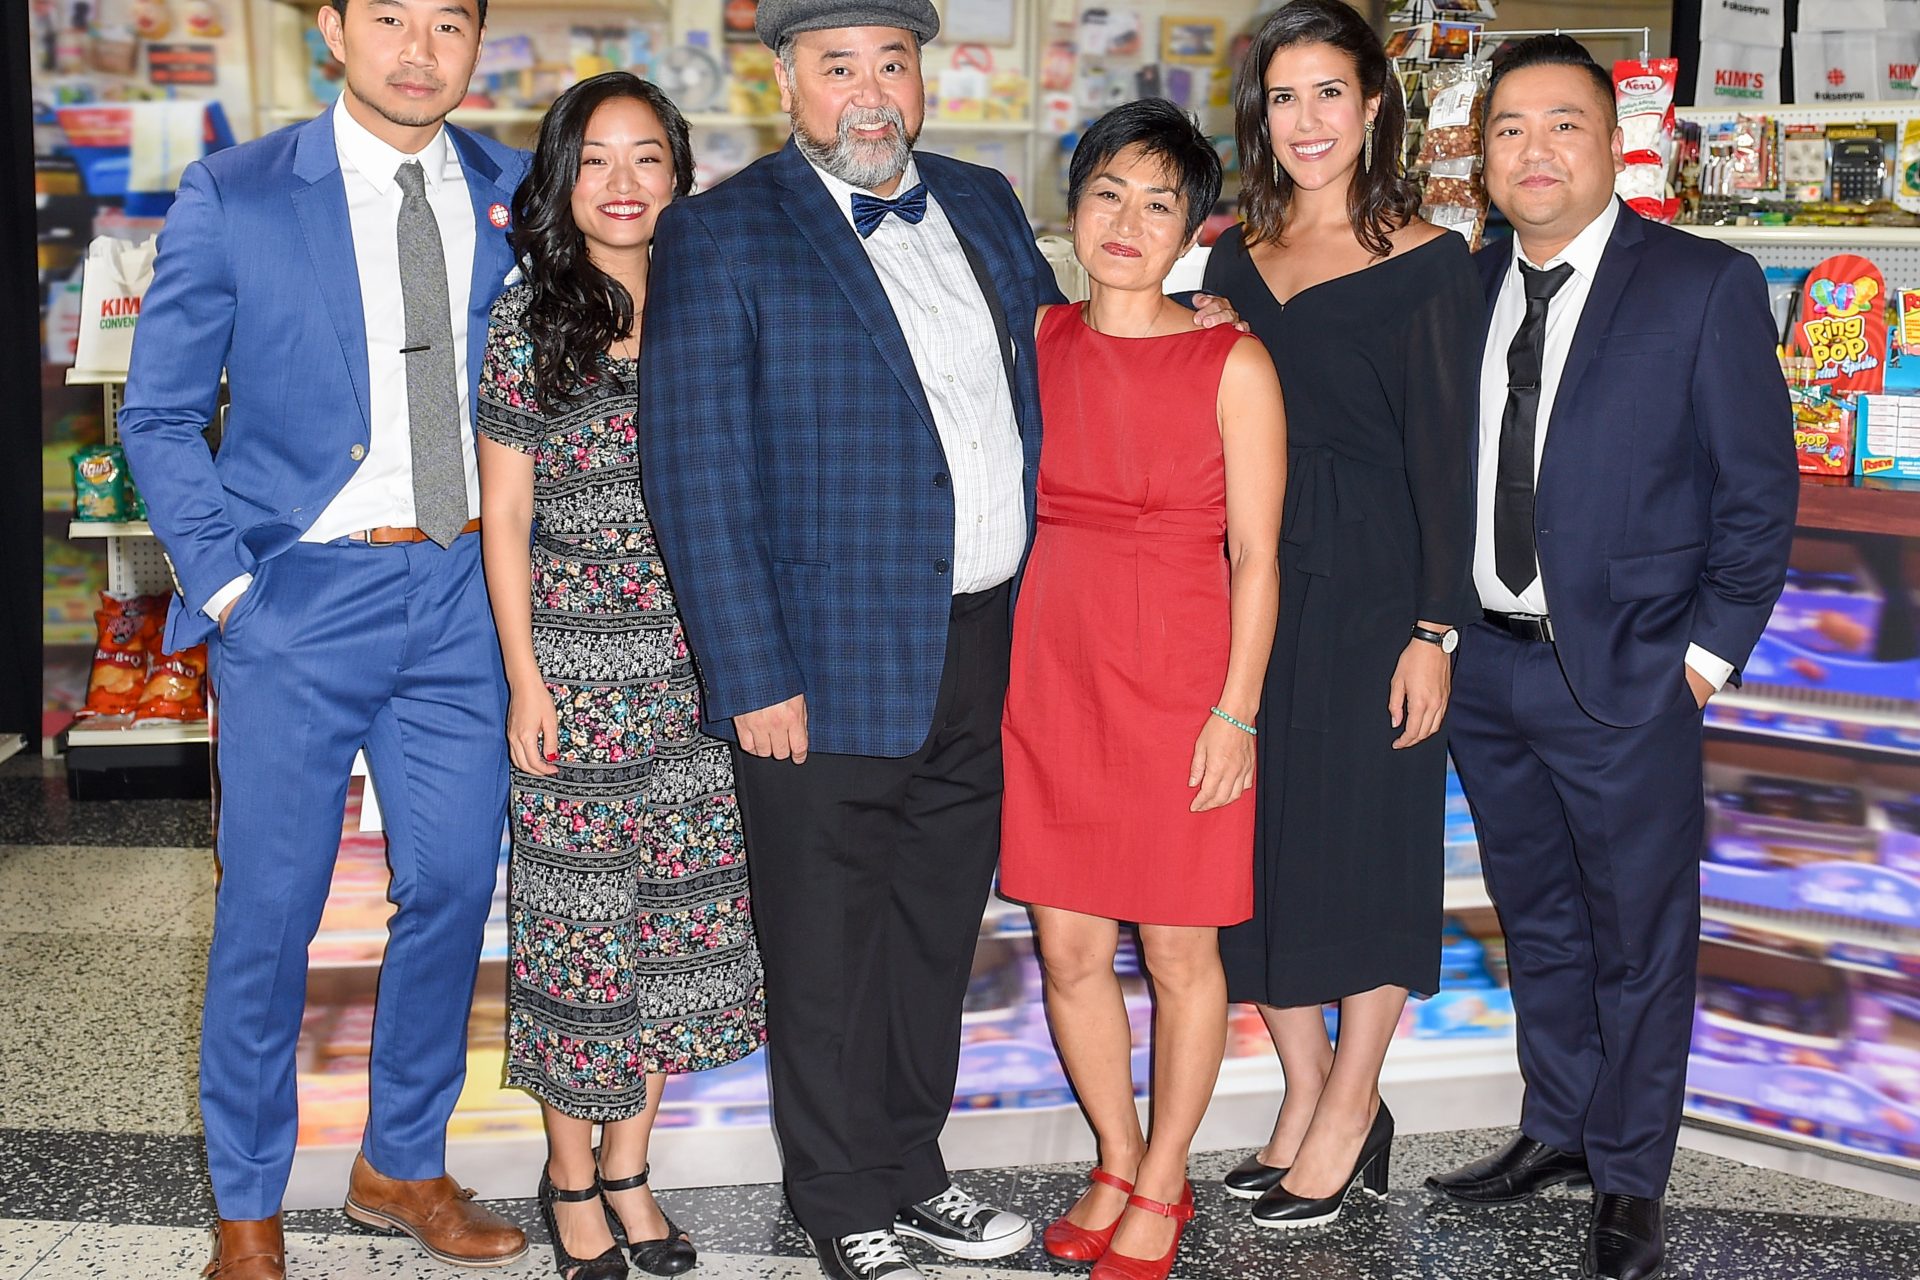 Where have the cast members gone since 'Kim’s Convenience'?